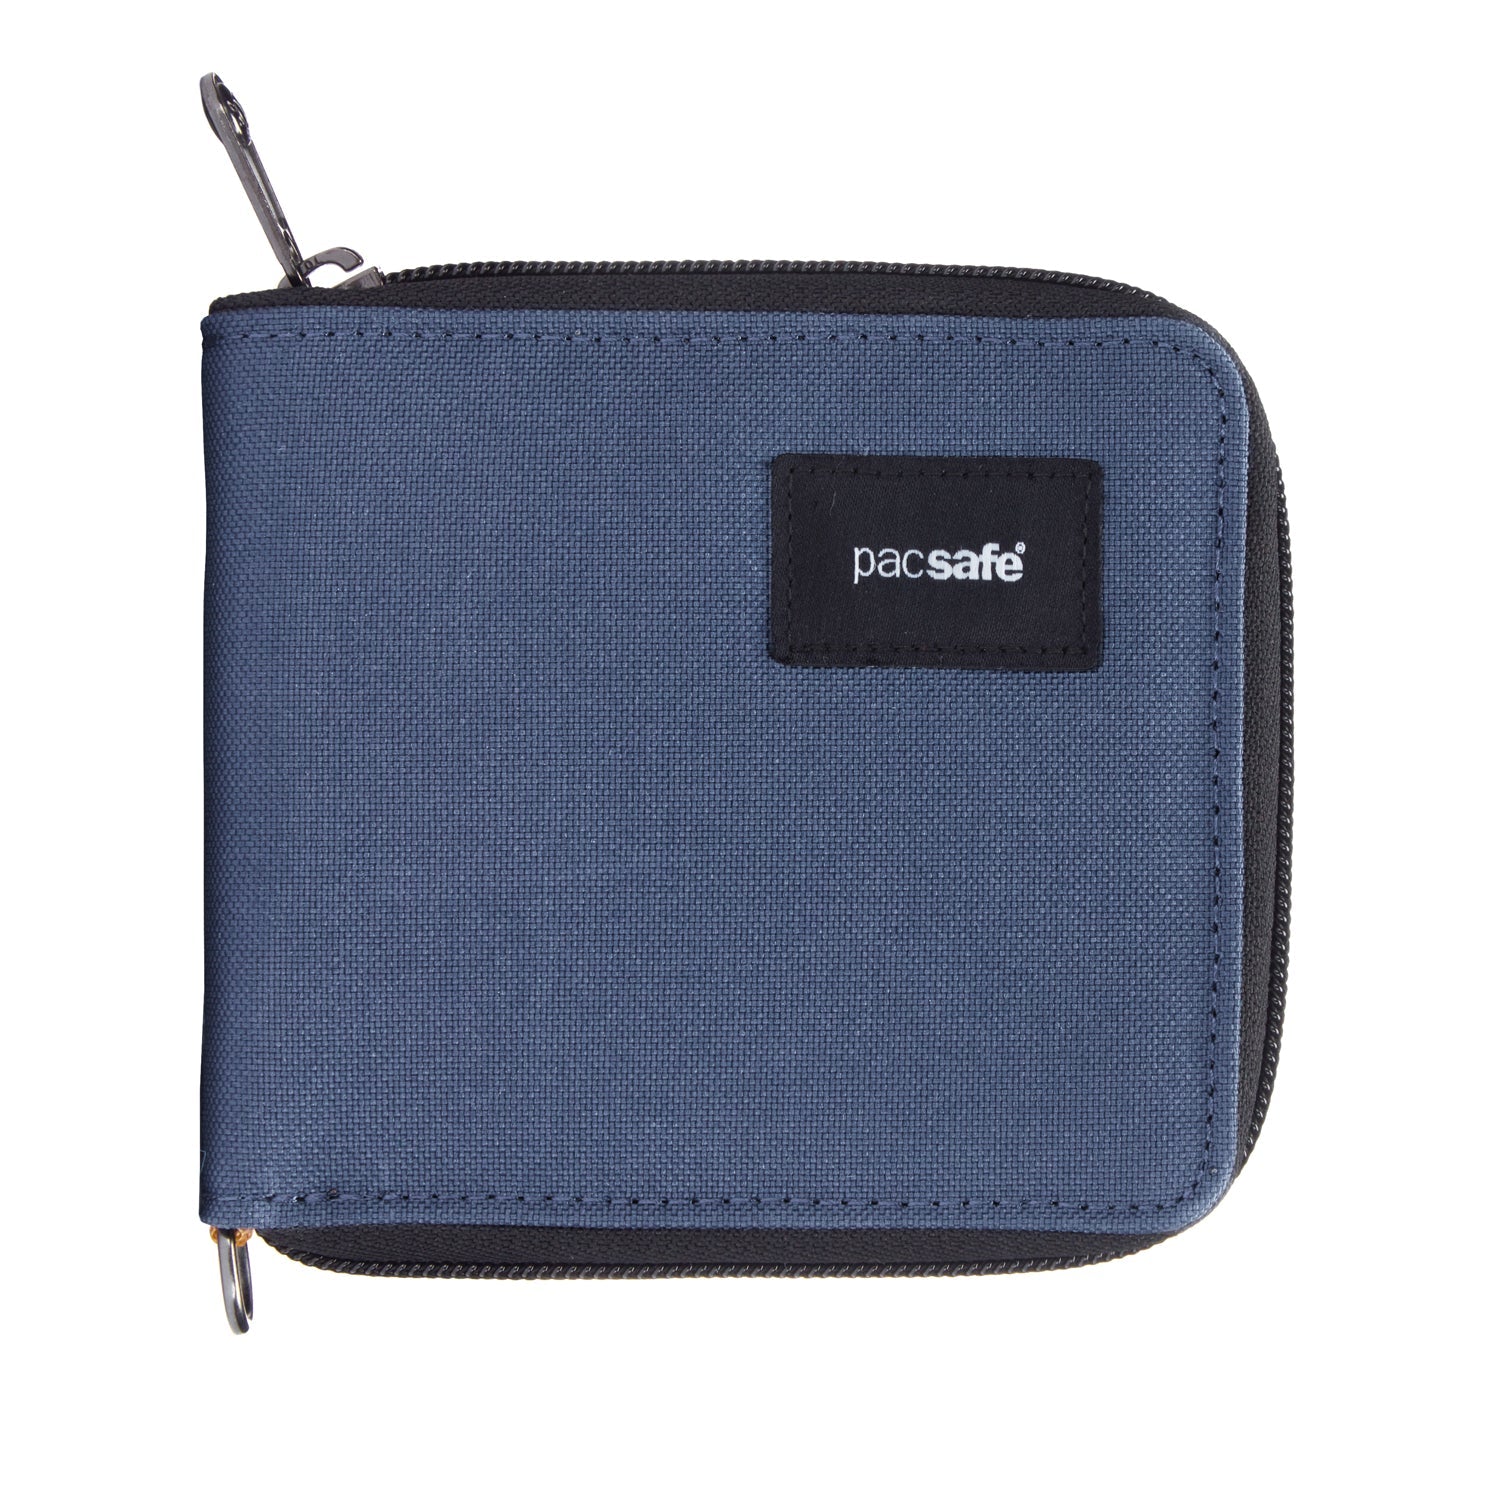 Pacsafe Coversafe V50 - RFID Blocking Passport Protector by Pacsafe ( Coversafe-V50-PP)